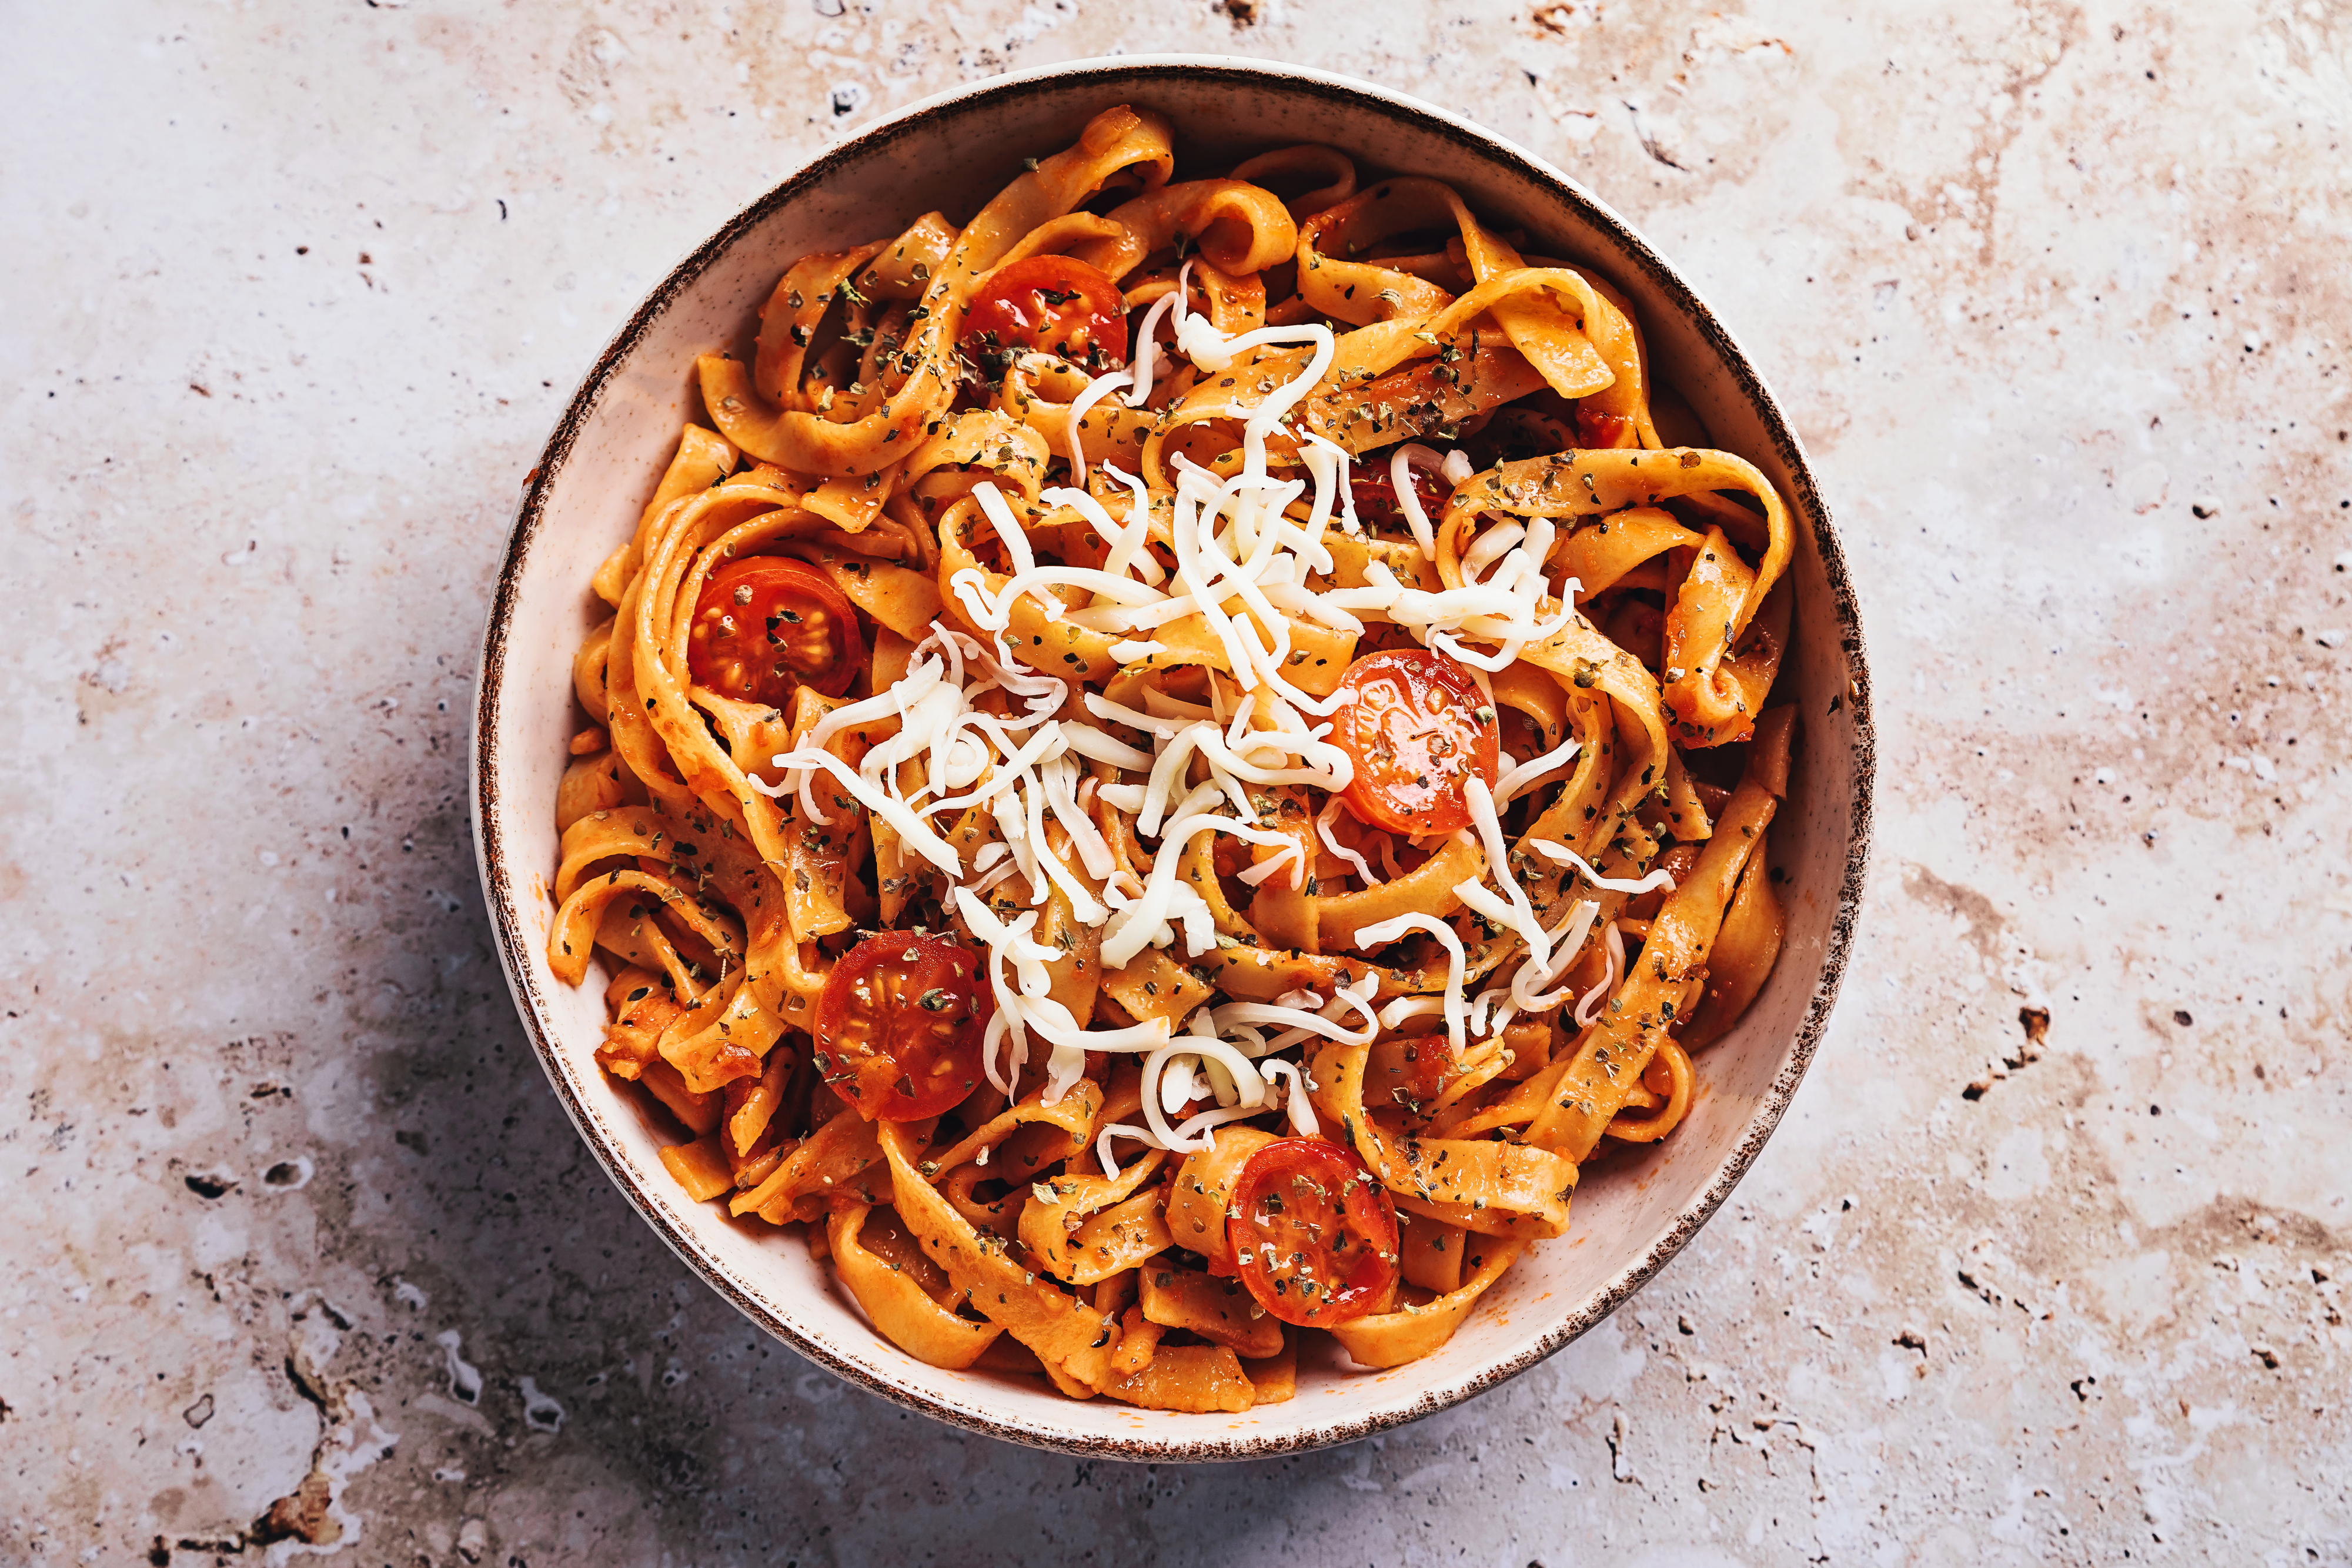 Bowl of pasta with tomatoes and cheese, hinting at a romantic homemade meal